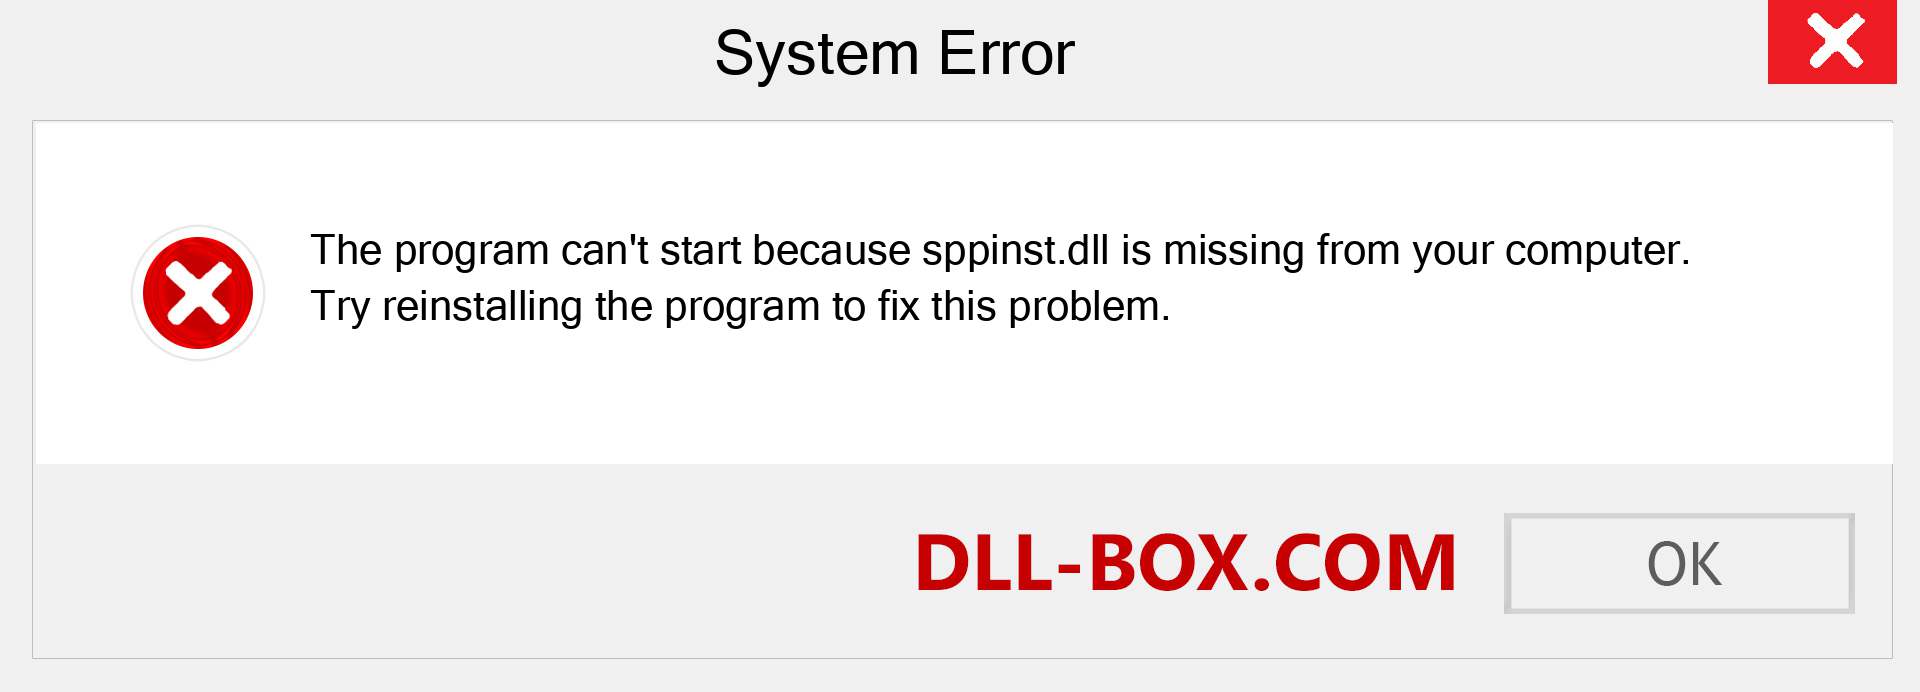  sppinst.dll file is missing?. Download for Windows 7, 8, 10 - Fix  sppinst dll Missing Error on Windows, photos, images